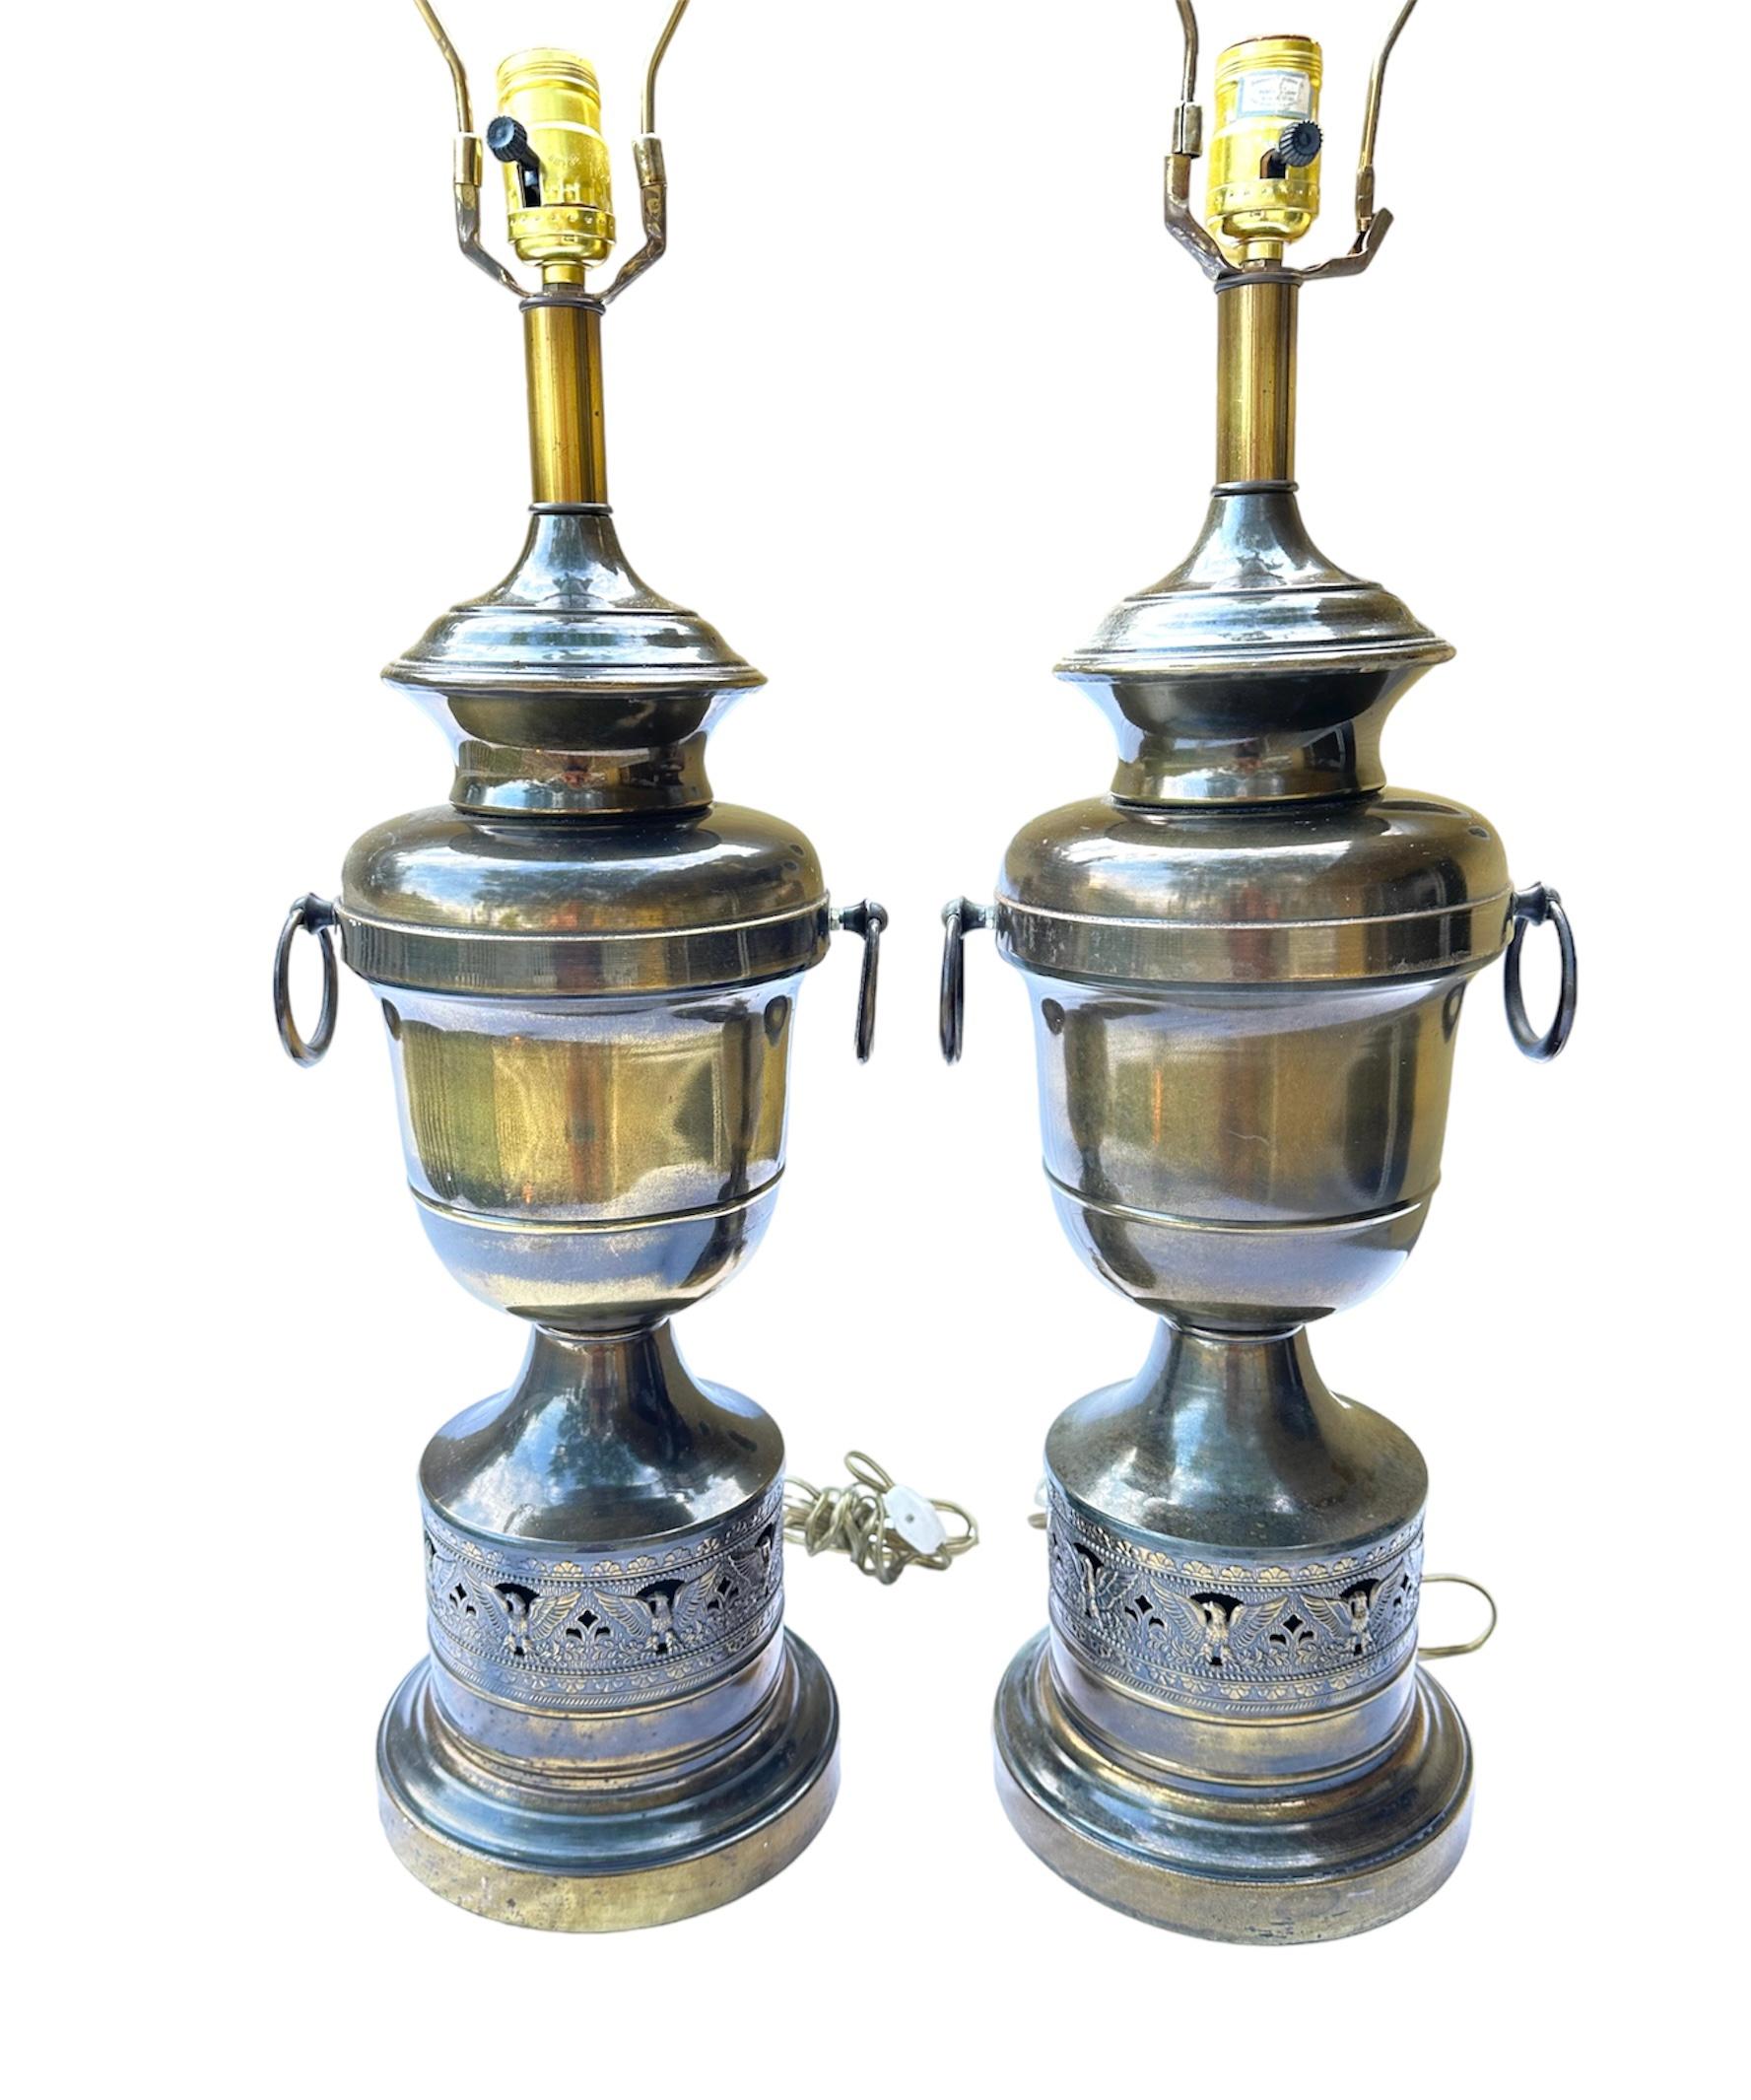 Brass Plated Table Lamps with the American Eagle 2